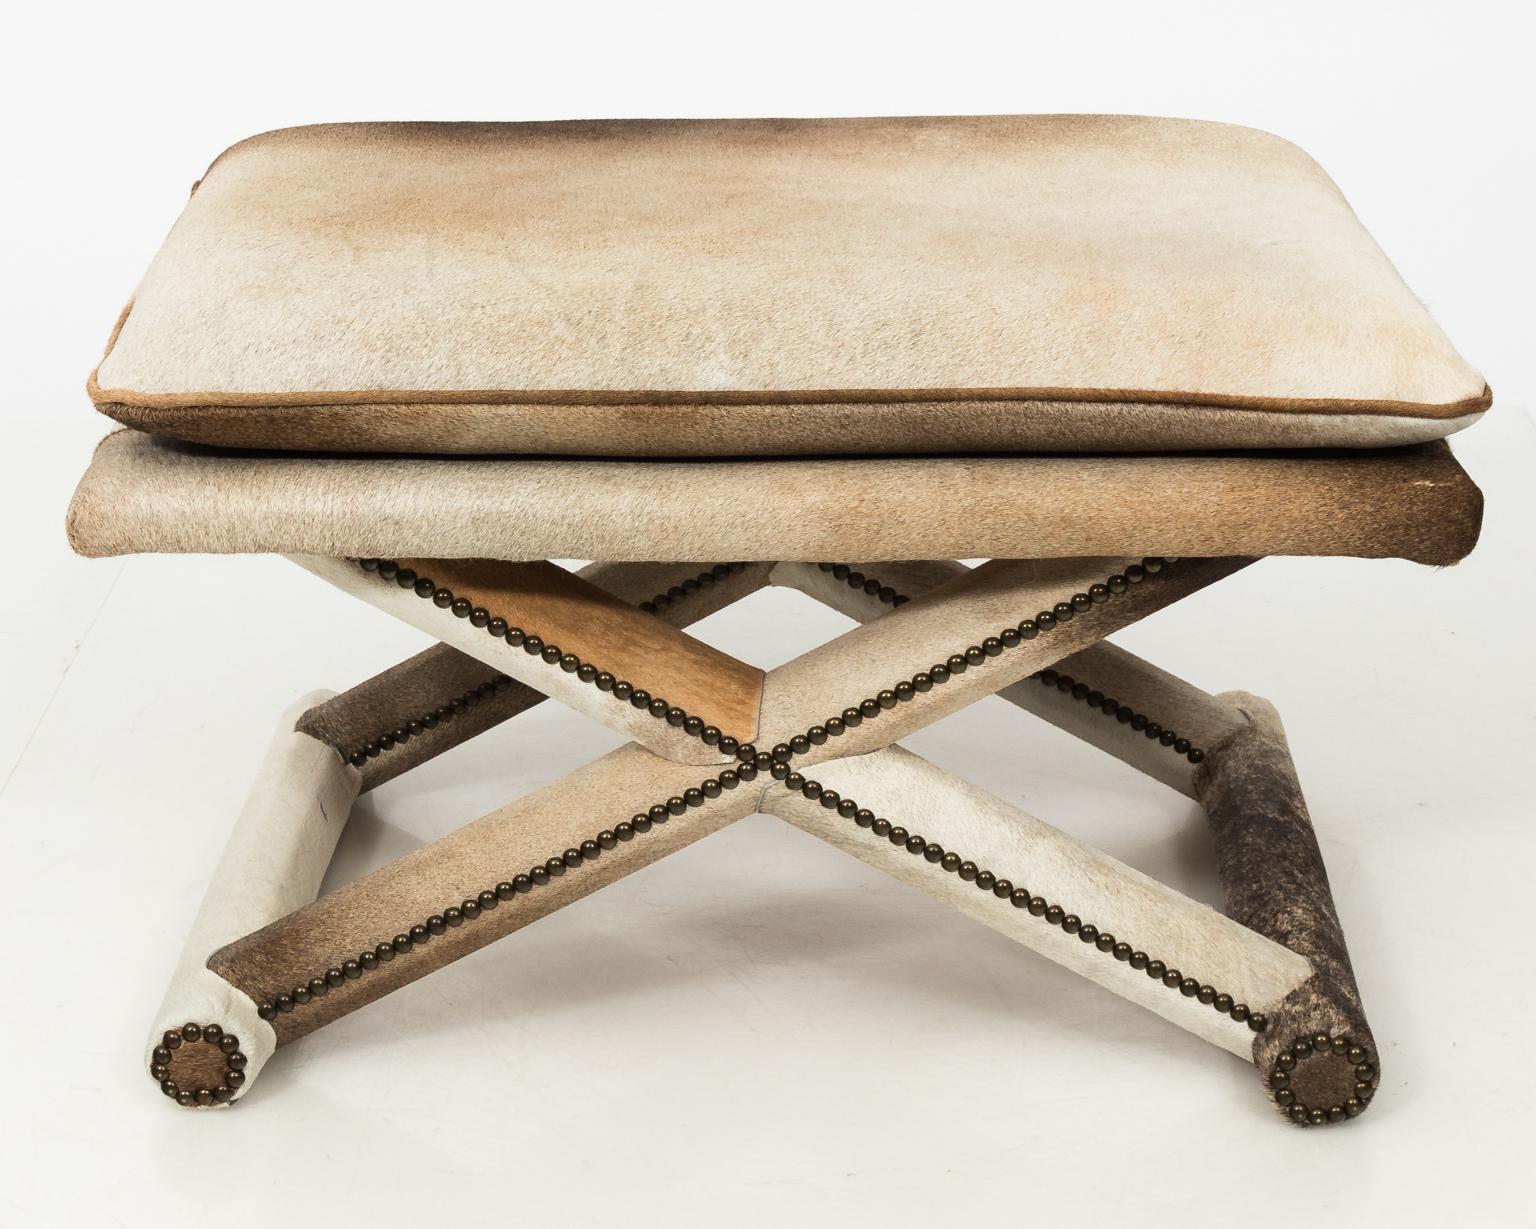 X form bench or stool completely upholstered in cowhide, with attached seat cushion and decorative nail heads.
 